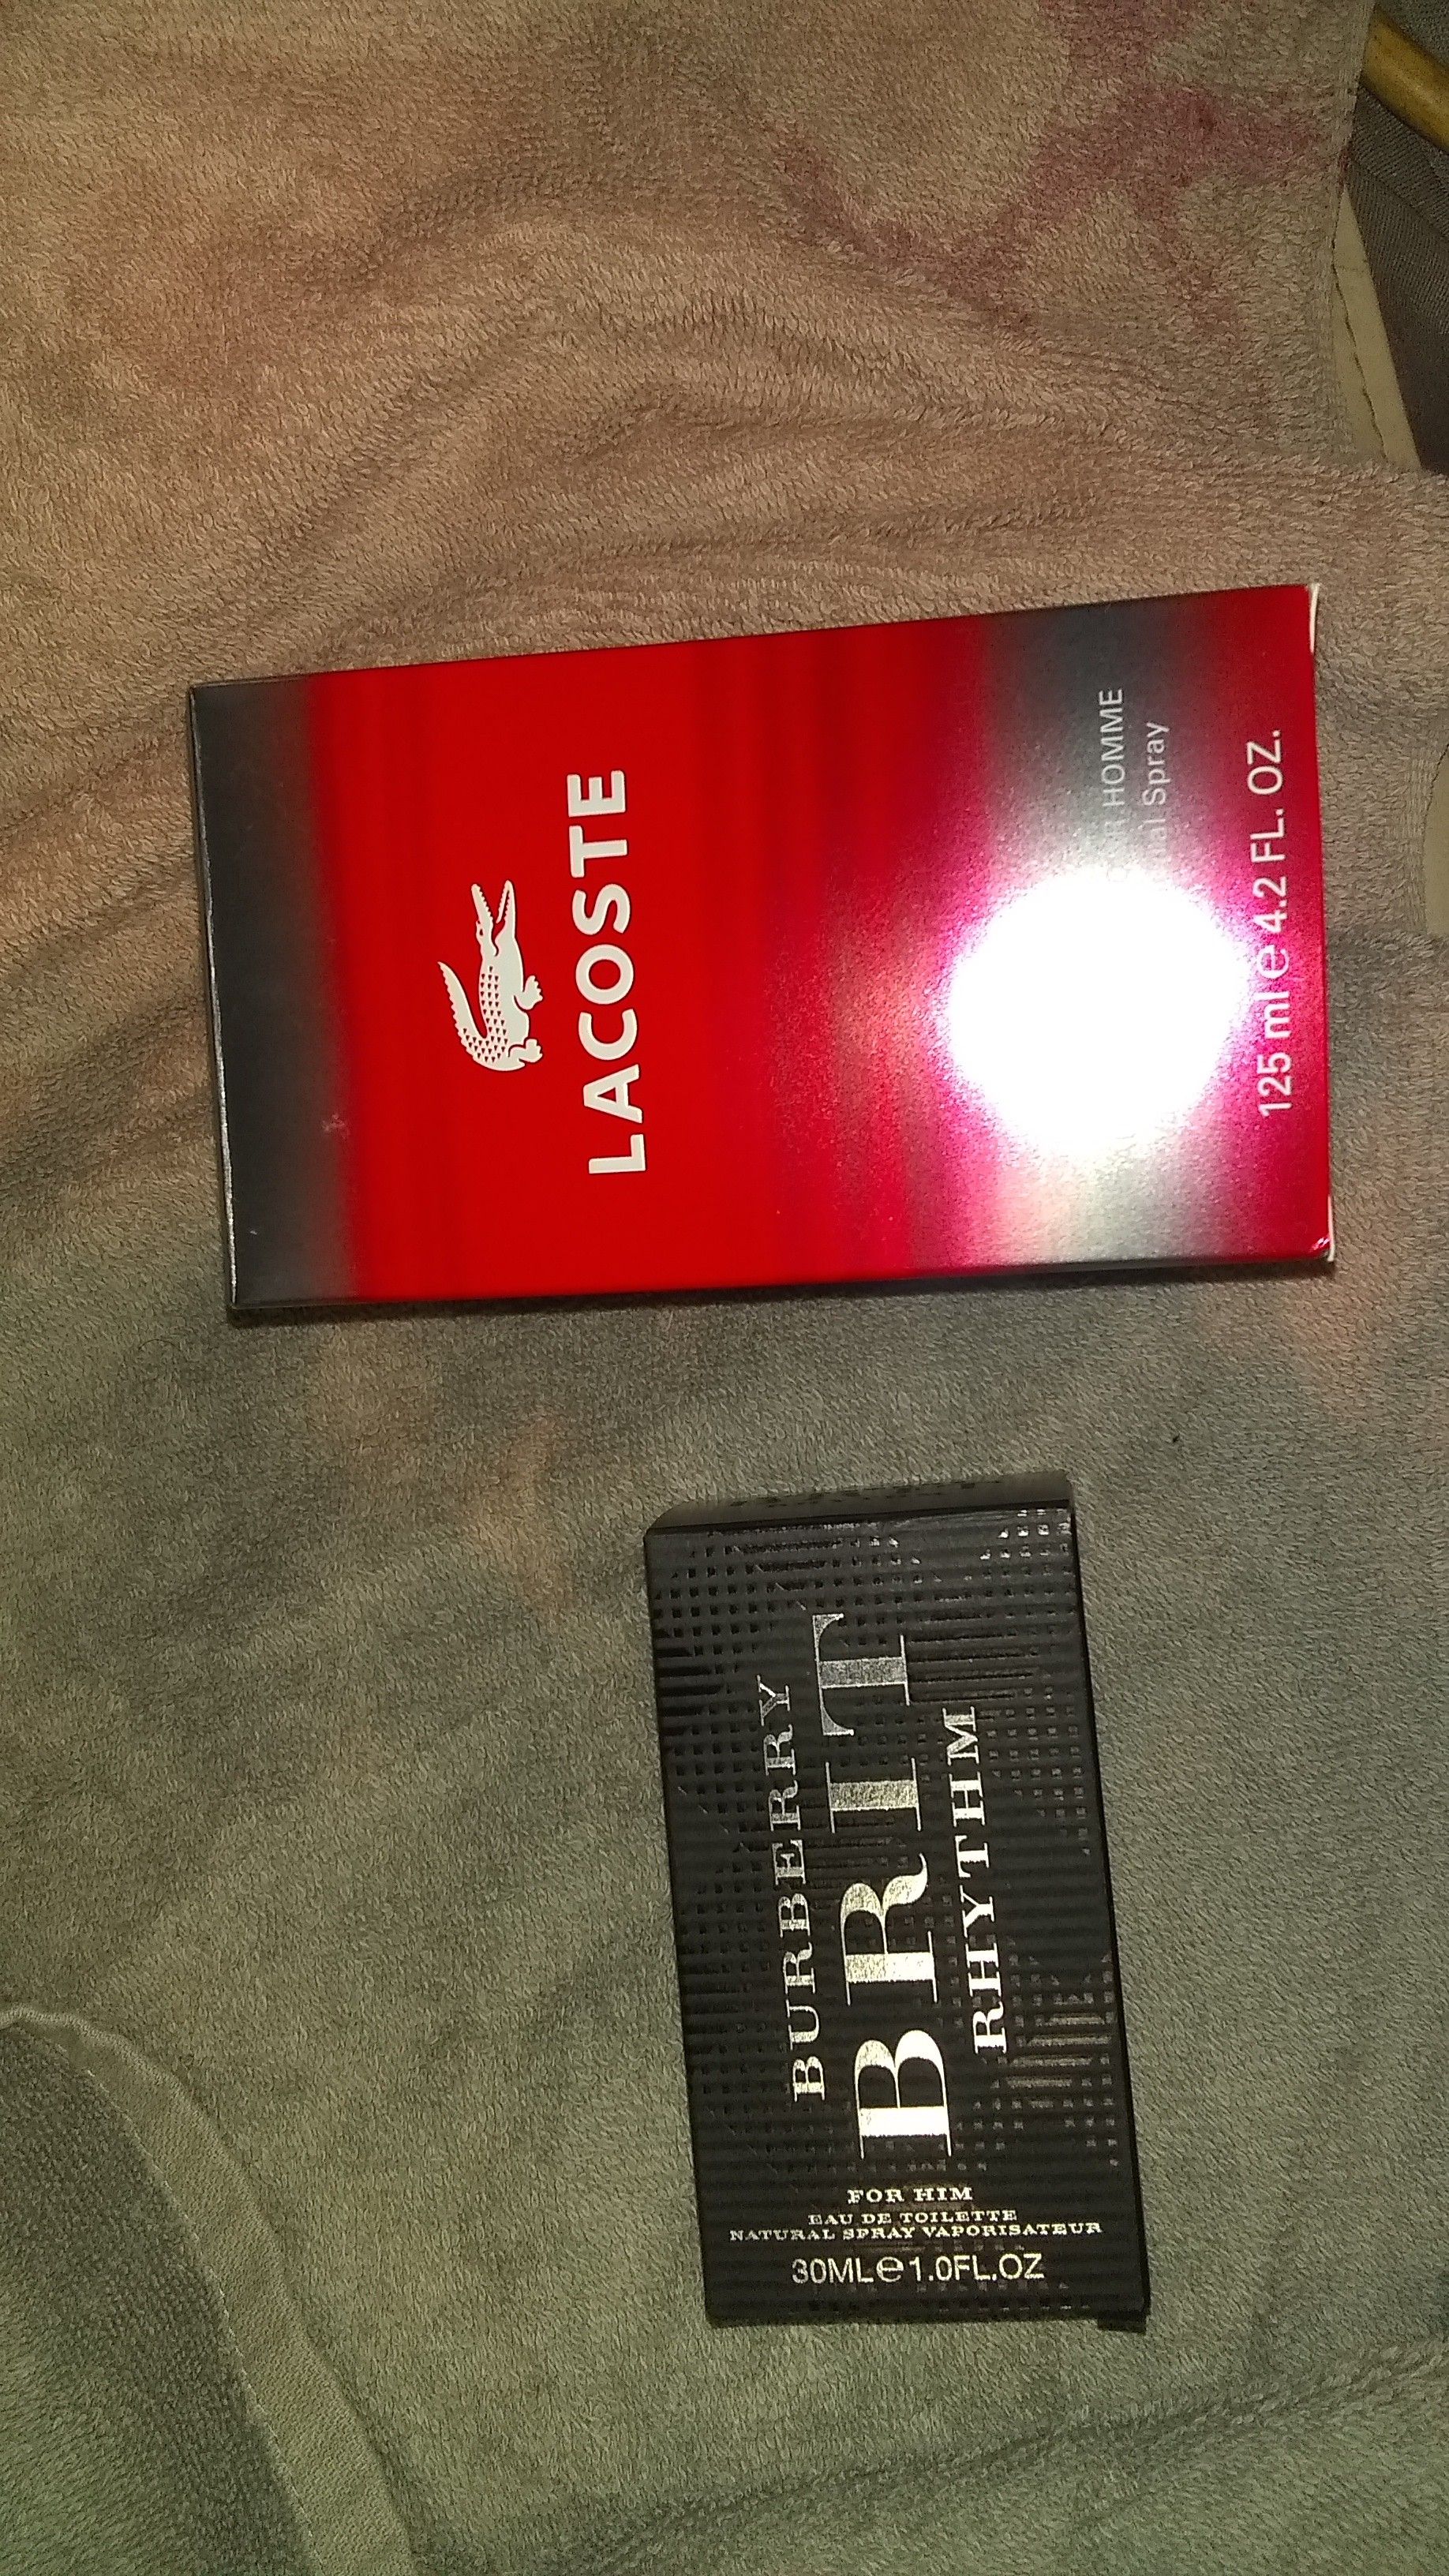 Lacoste and Burberry Brit Rhythm Colognes